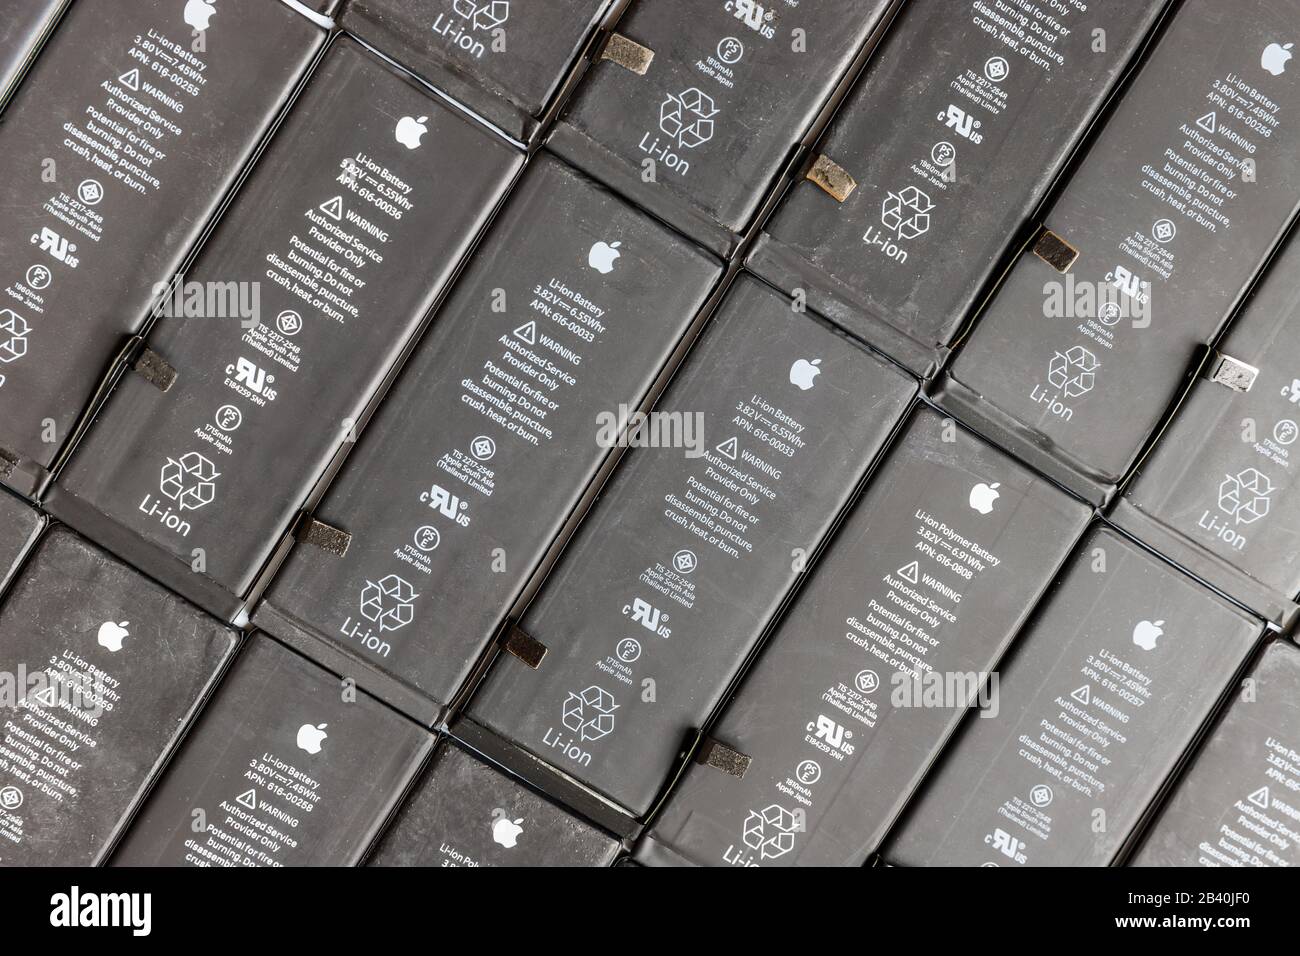 St. Petersburg, Russia - December 2, 2019: Close up of row used Li-ion Polymer batteries of Apple iPhone preparation for recycling Stock Photo